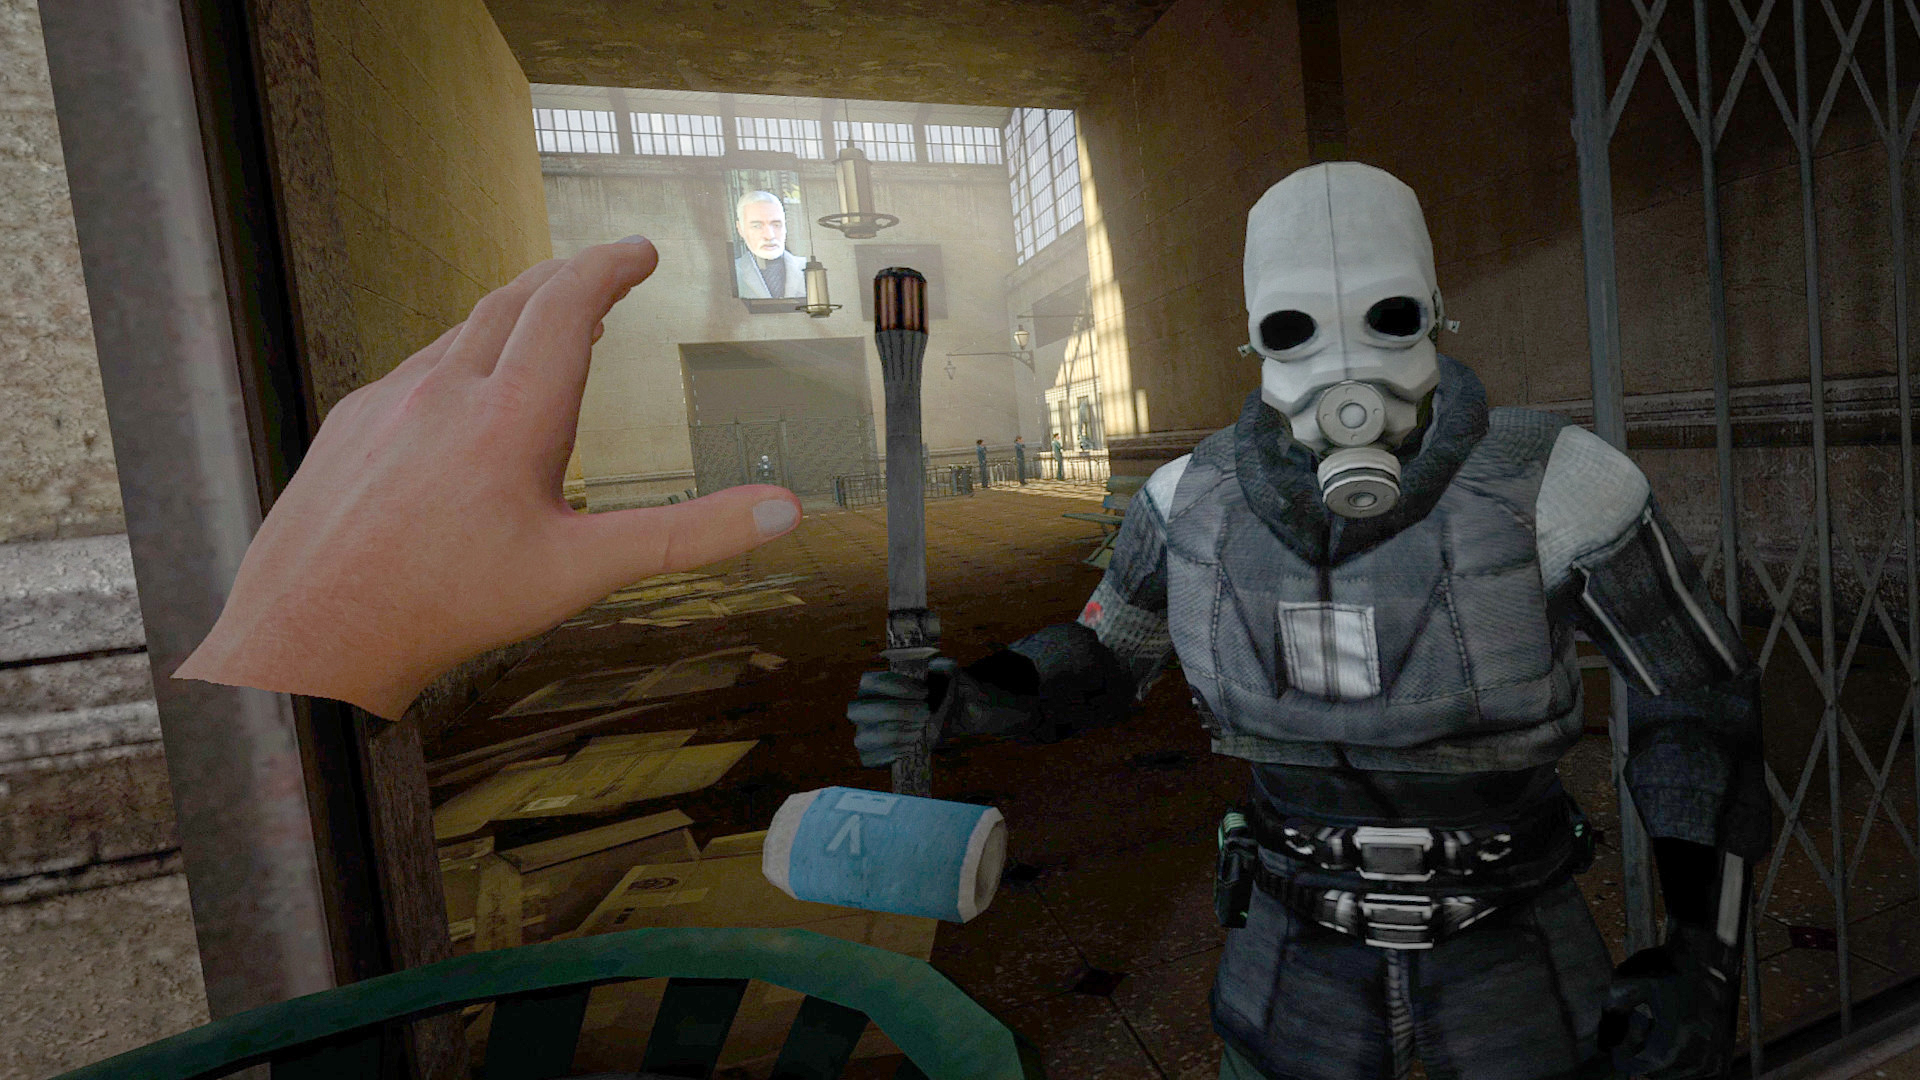 The Half-Life 2 VR Mod is out on Steam, so you can finally, literally, pick up that can